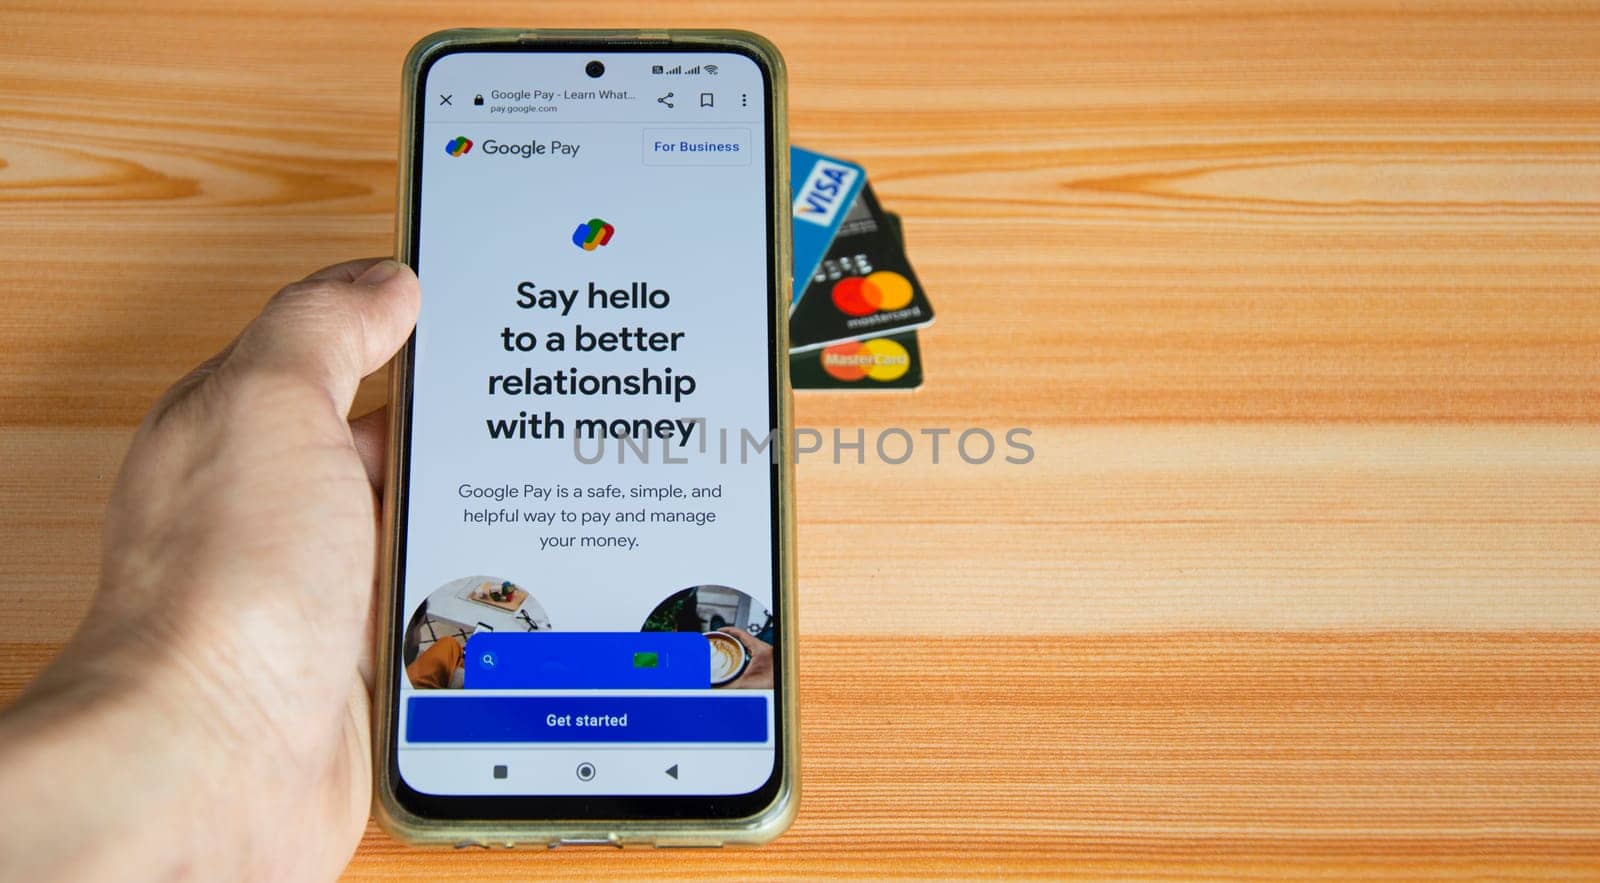 26-11-2022 Chonburi, Thailand, Google Gpay, Wallet is starting to use and is an application that combines financial matters Purchasing and shopping online